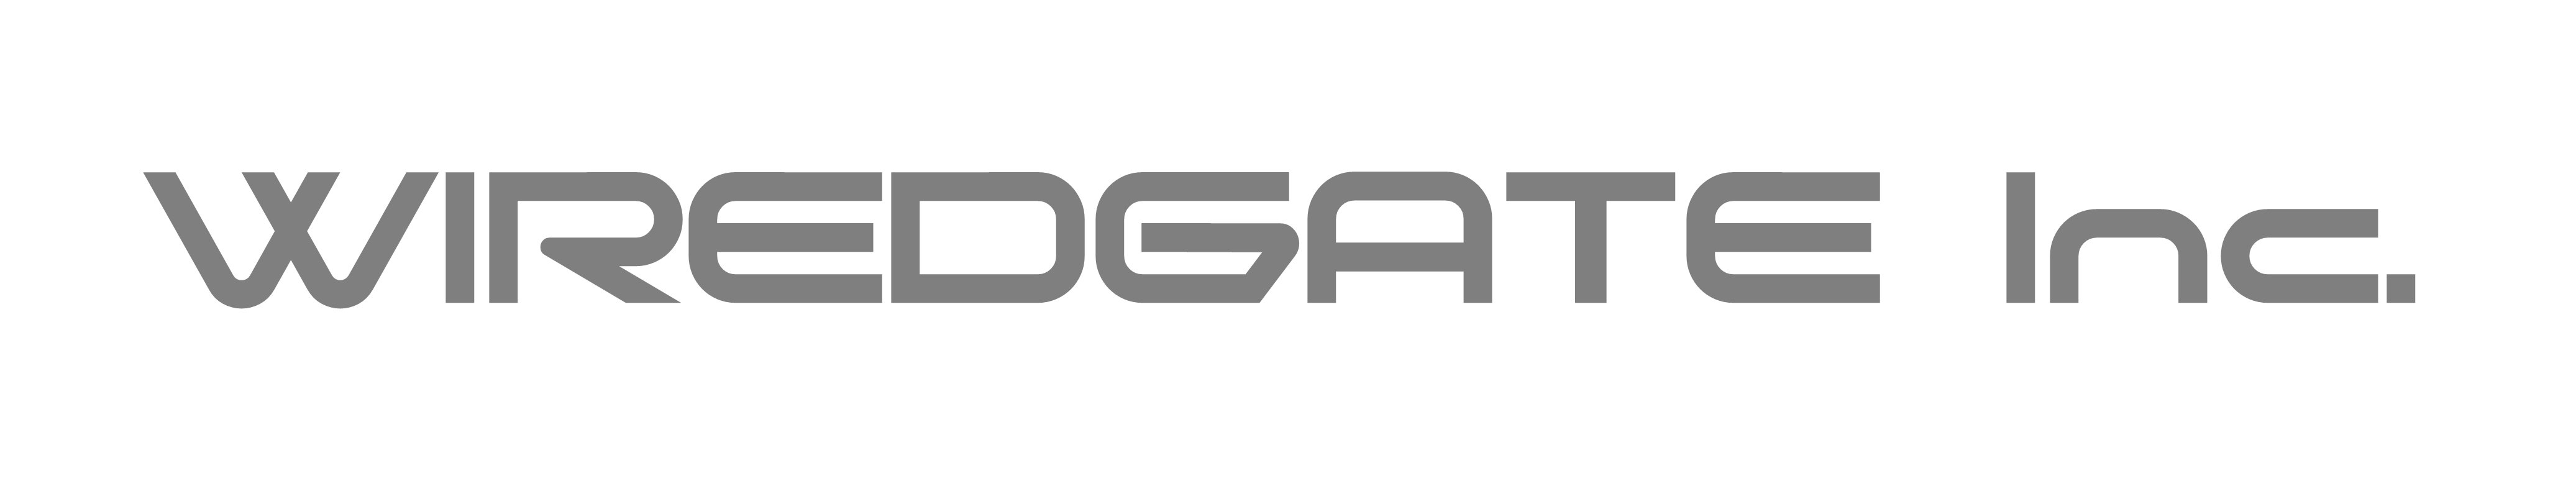 WIREDGATE Inc.